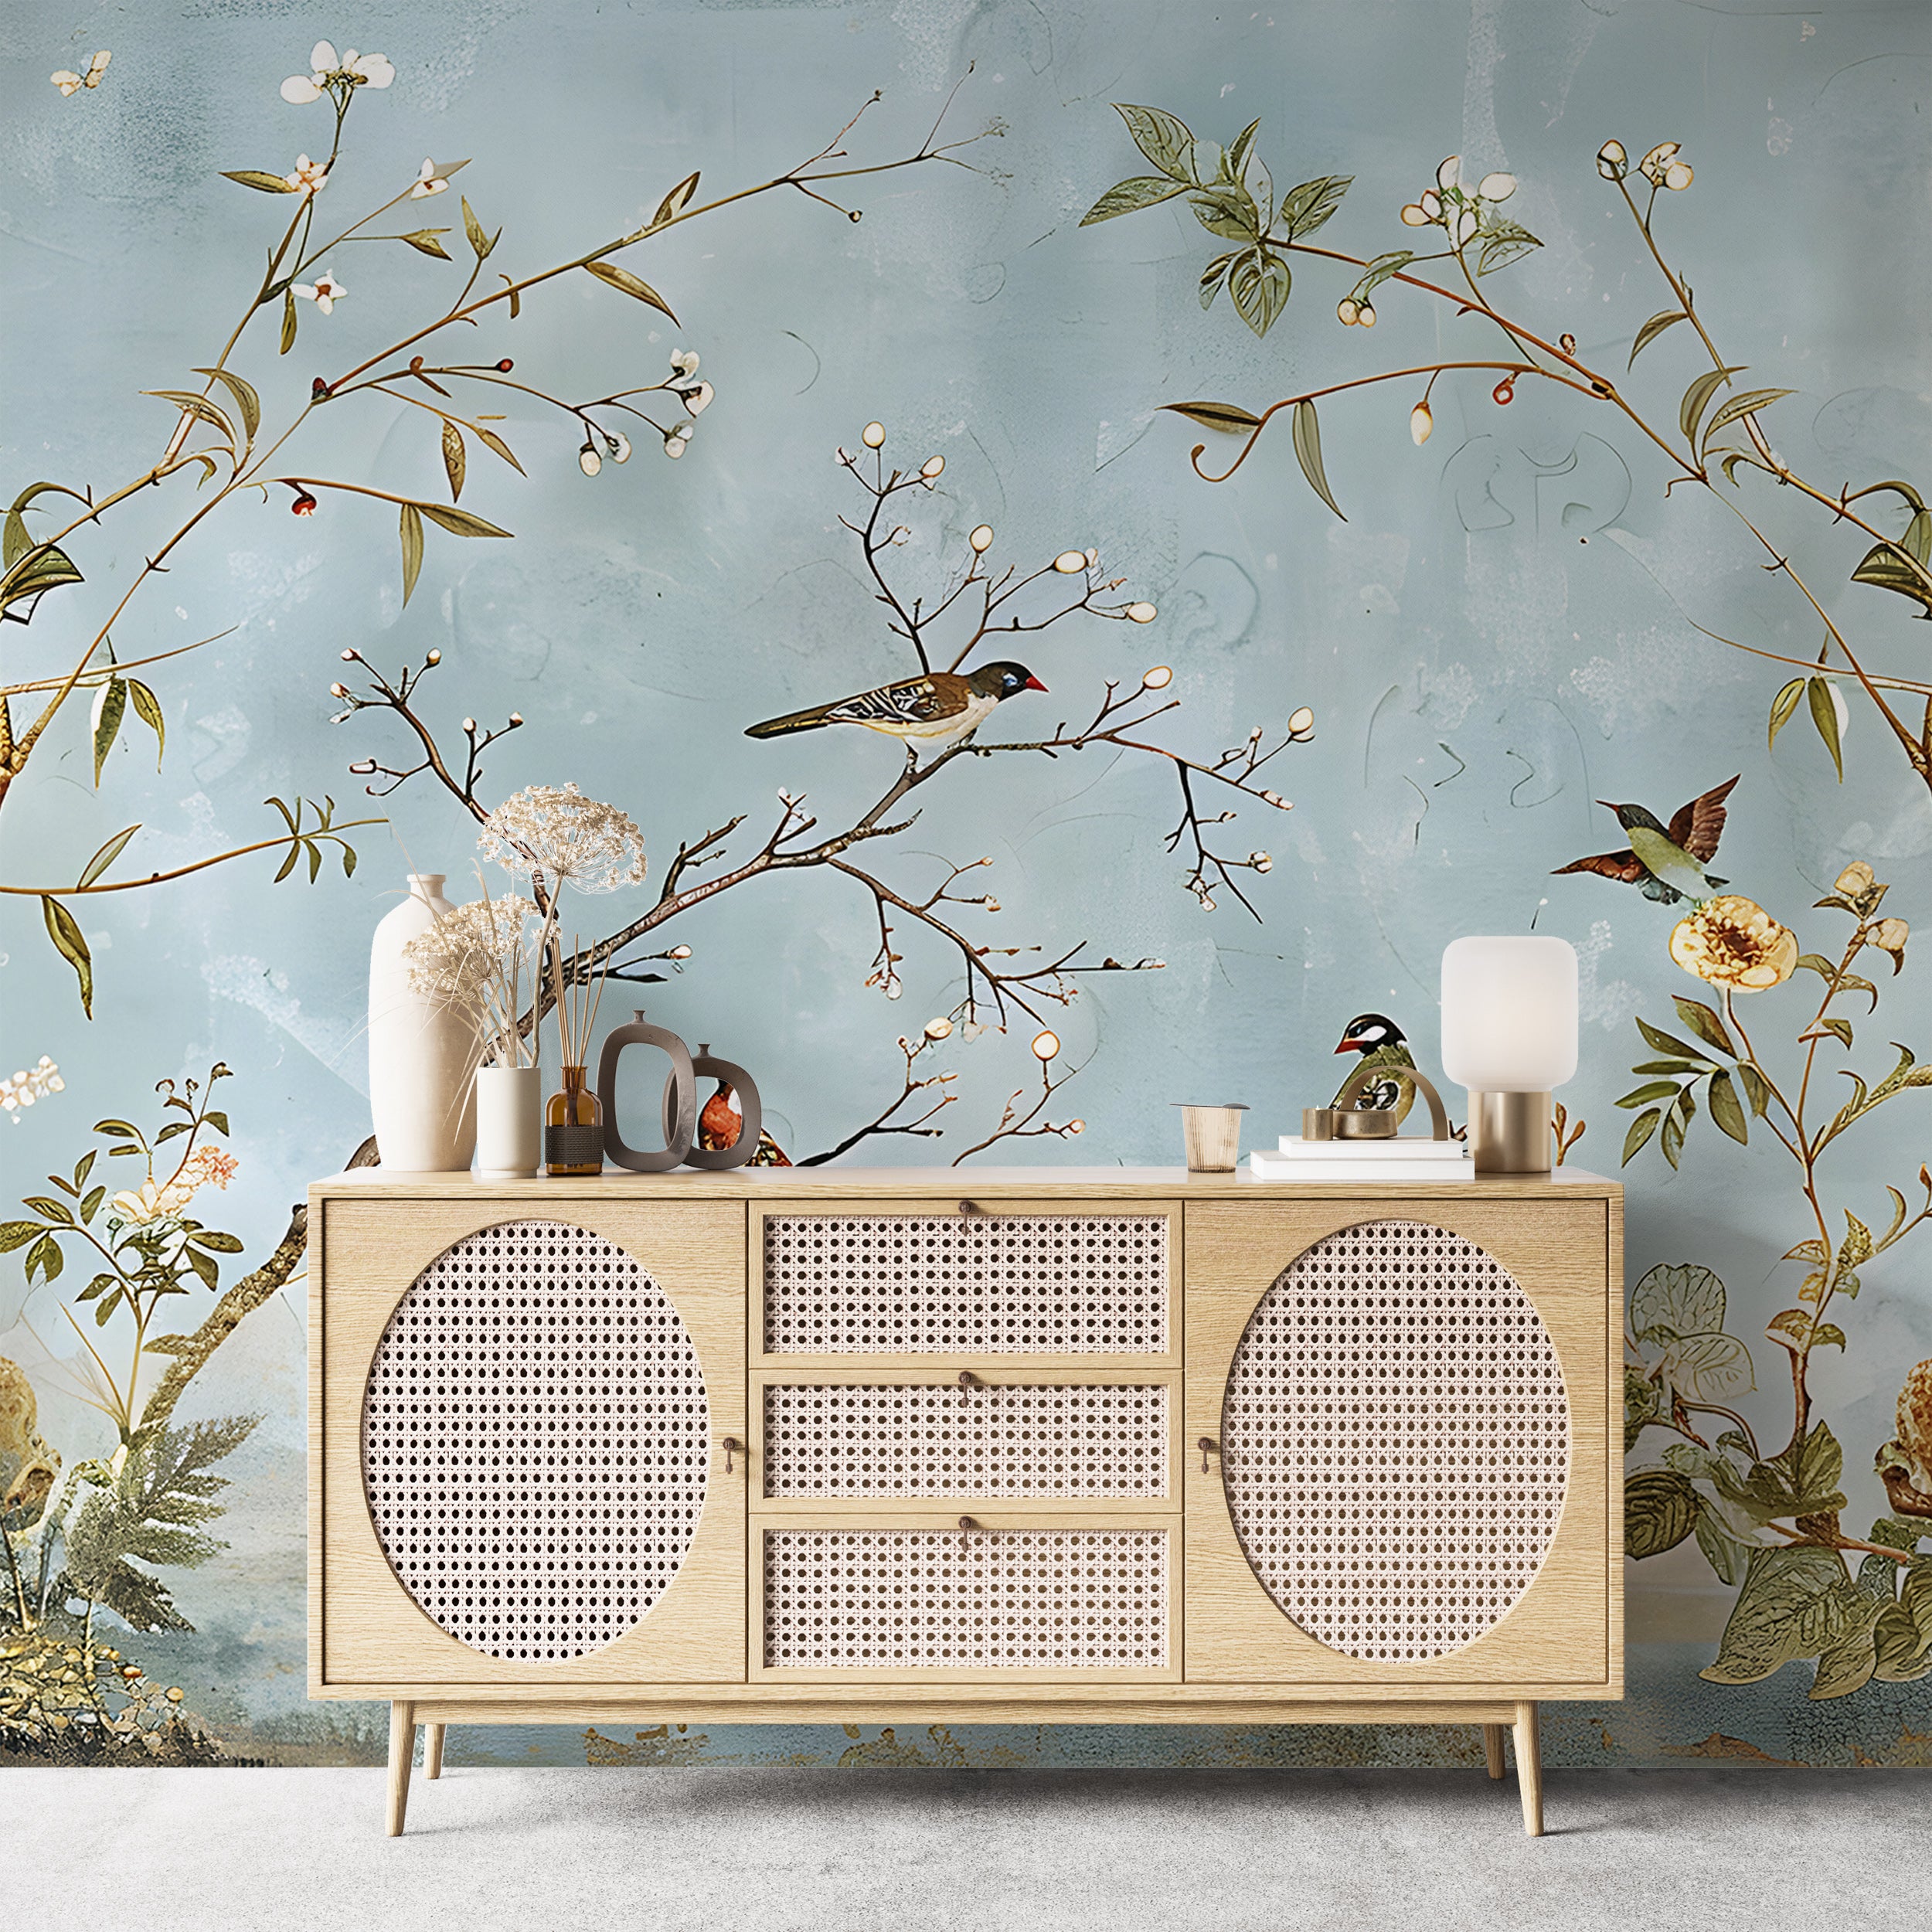 Vintage Style Wall Art with Birds on Trees